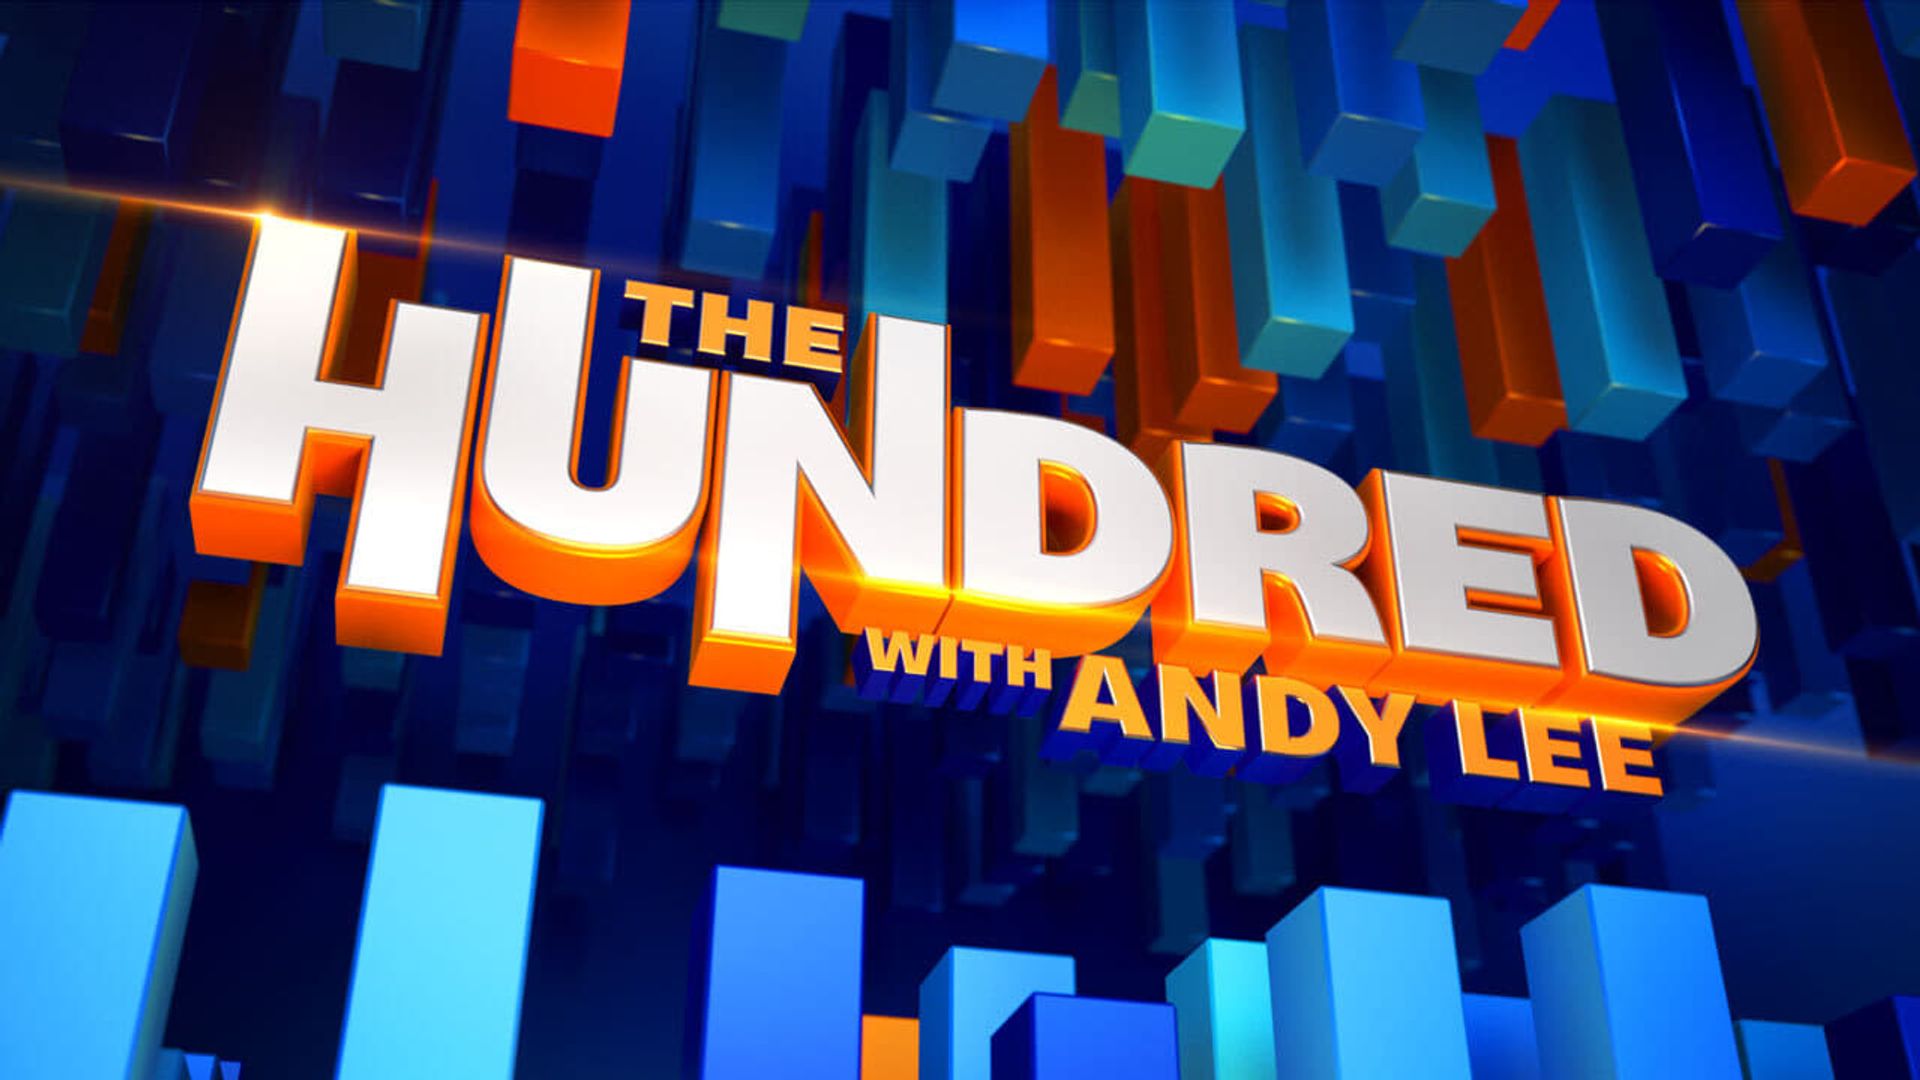 The Hundred with Andy Lee background